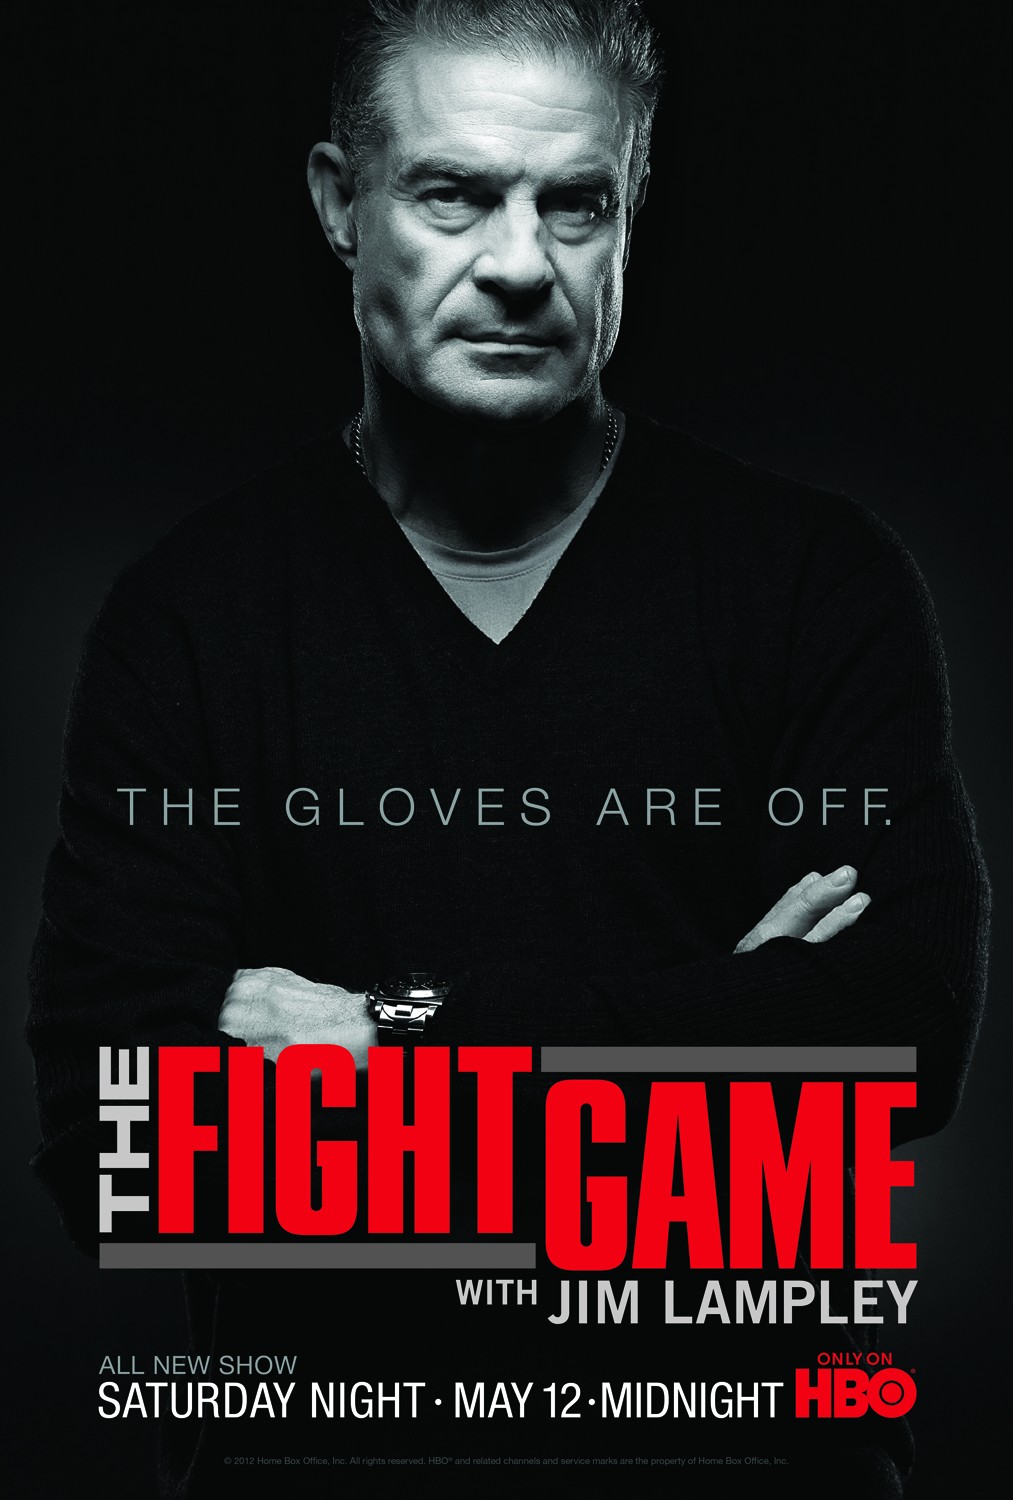 Extra Large TV Poster Image for The Fight Game with Jim Lampley 